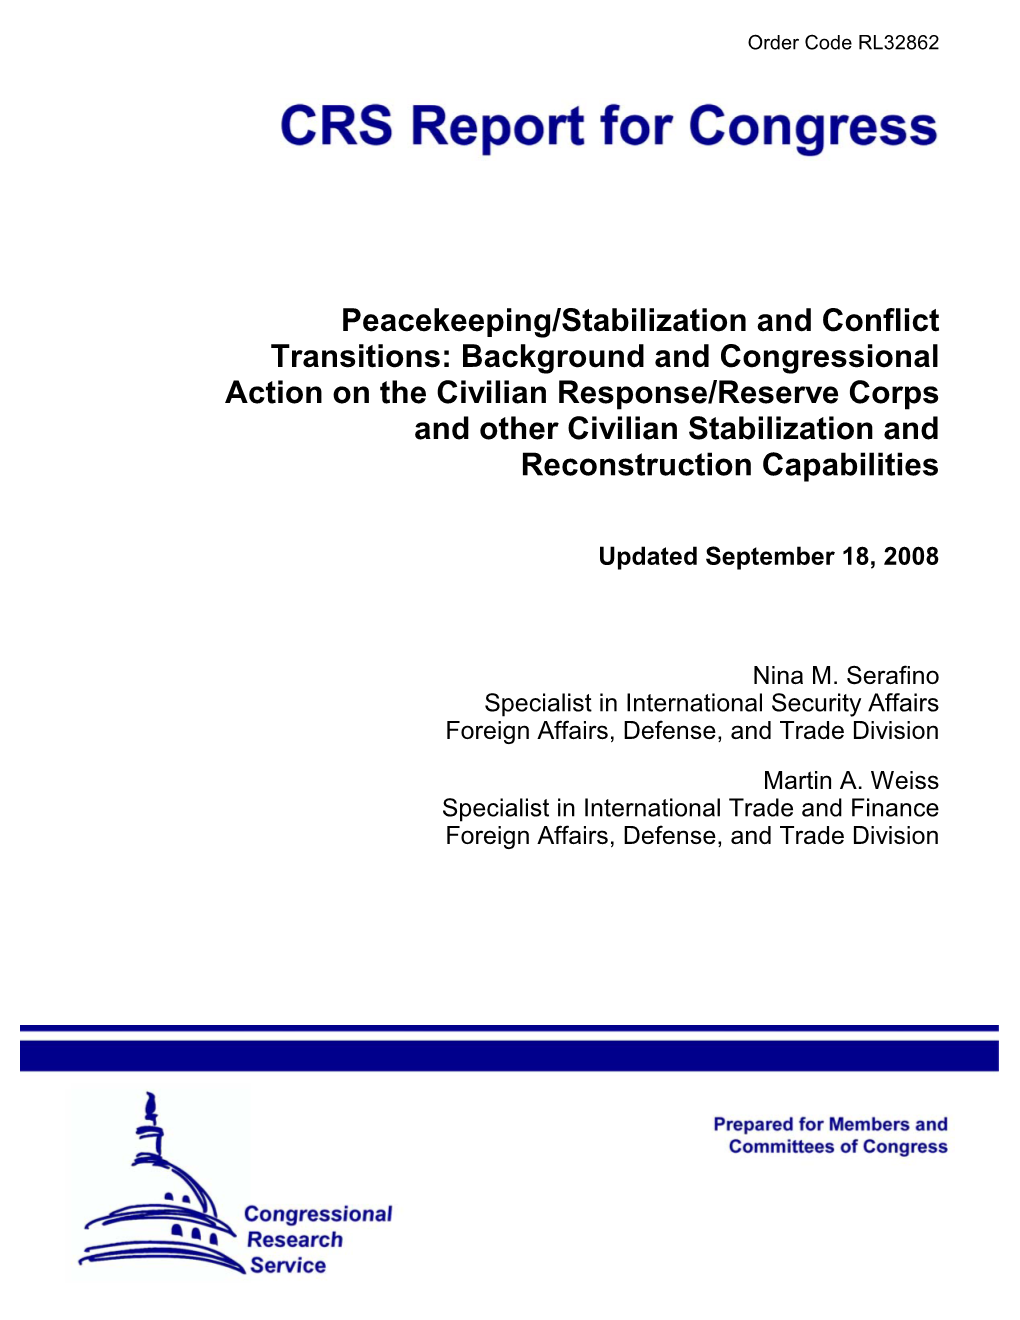 Peacekeeping/Stabilization and Conflict